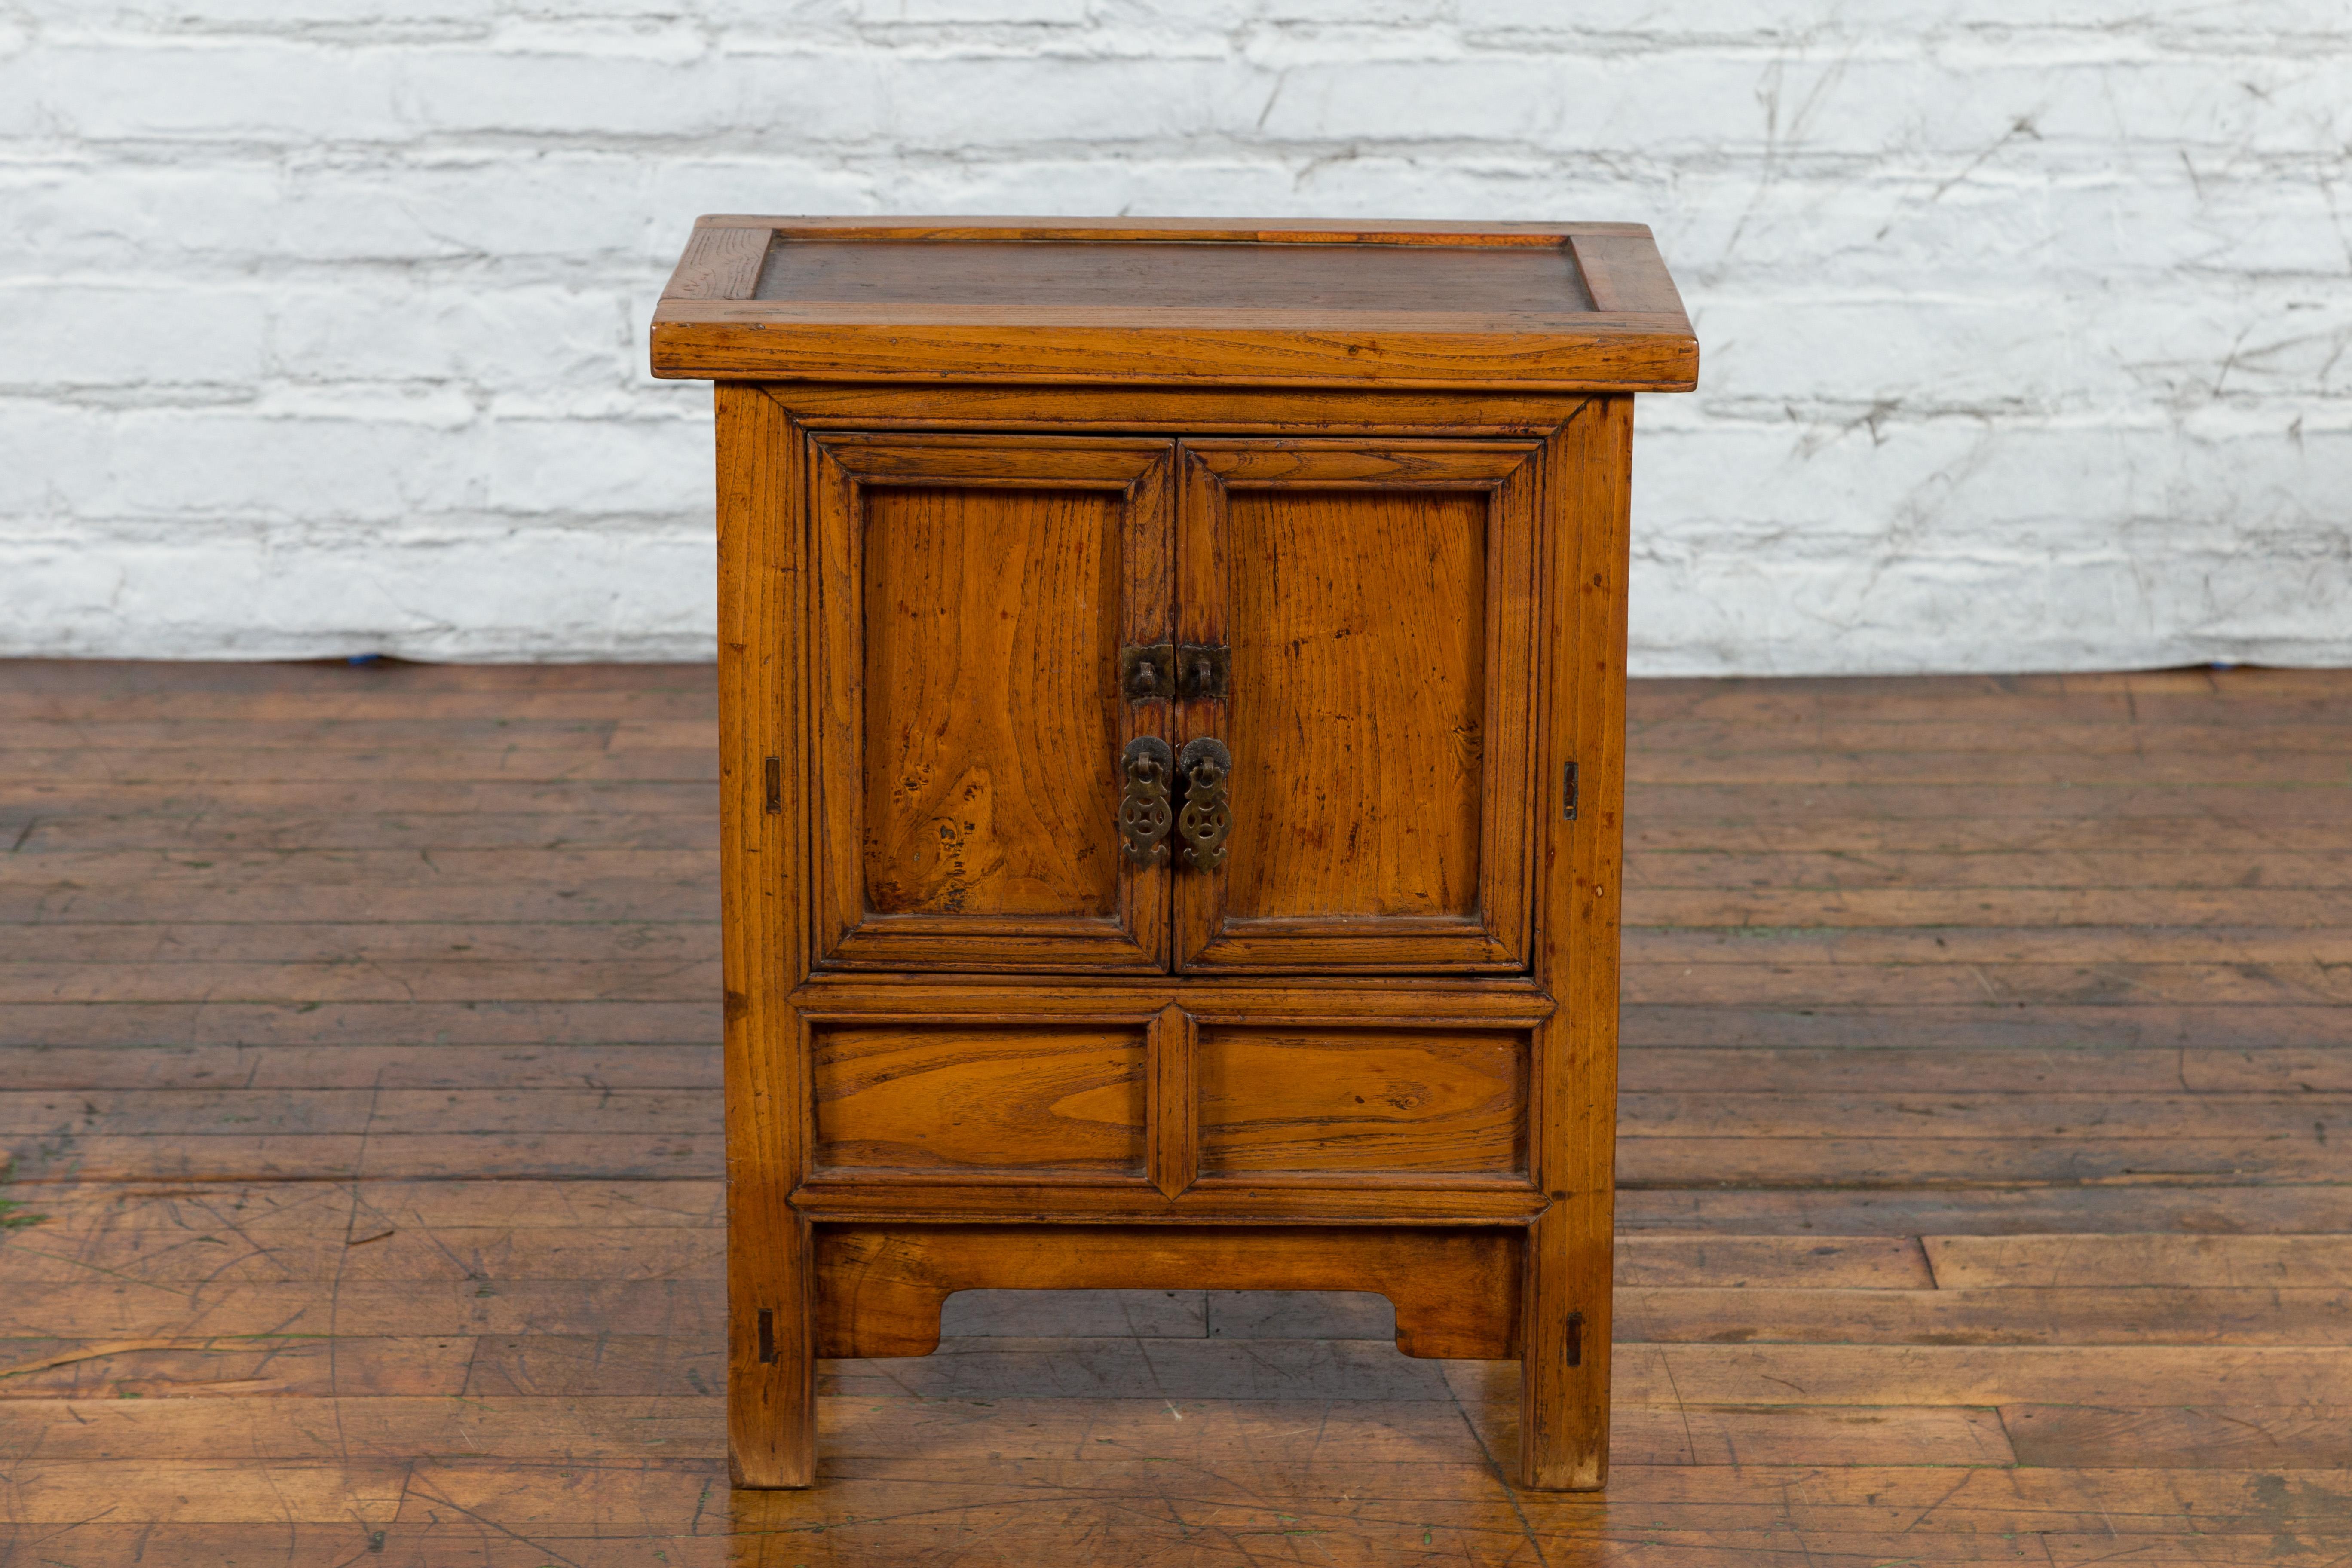 A Chinese late Qing Dynasty period wooden bedside cabinet from early 20th century, with two doors, carved apron and weathered patina. Created in China during the late Qing Dynasty in the 20th century, this wooden bedside cabinet captures the